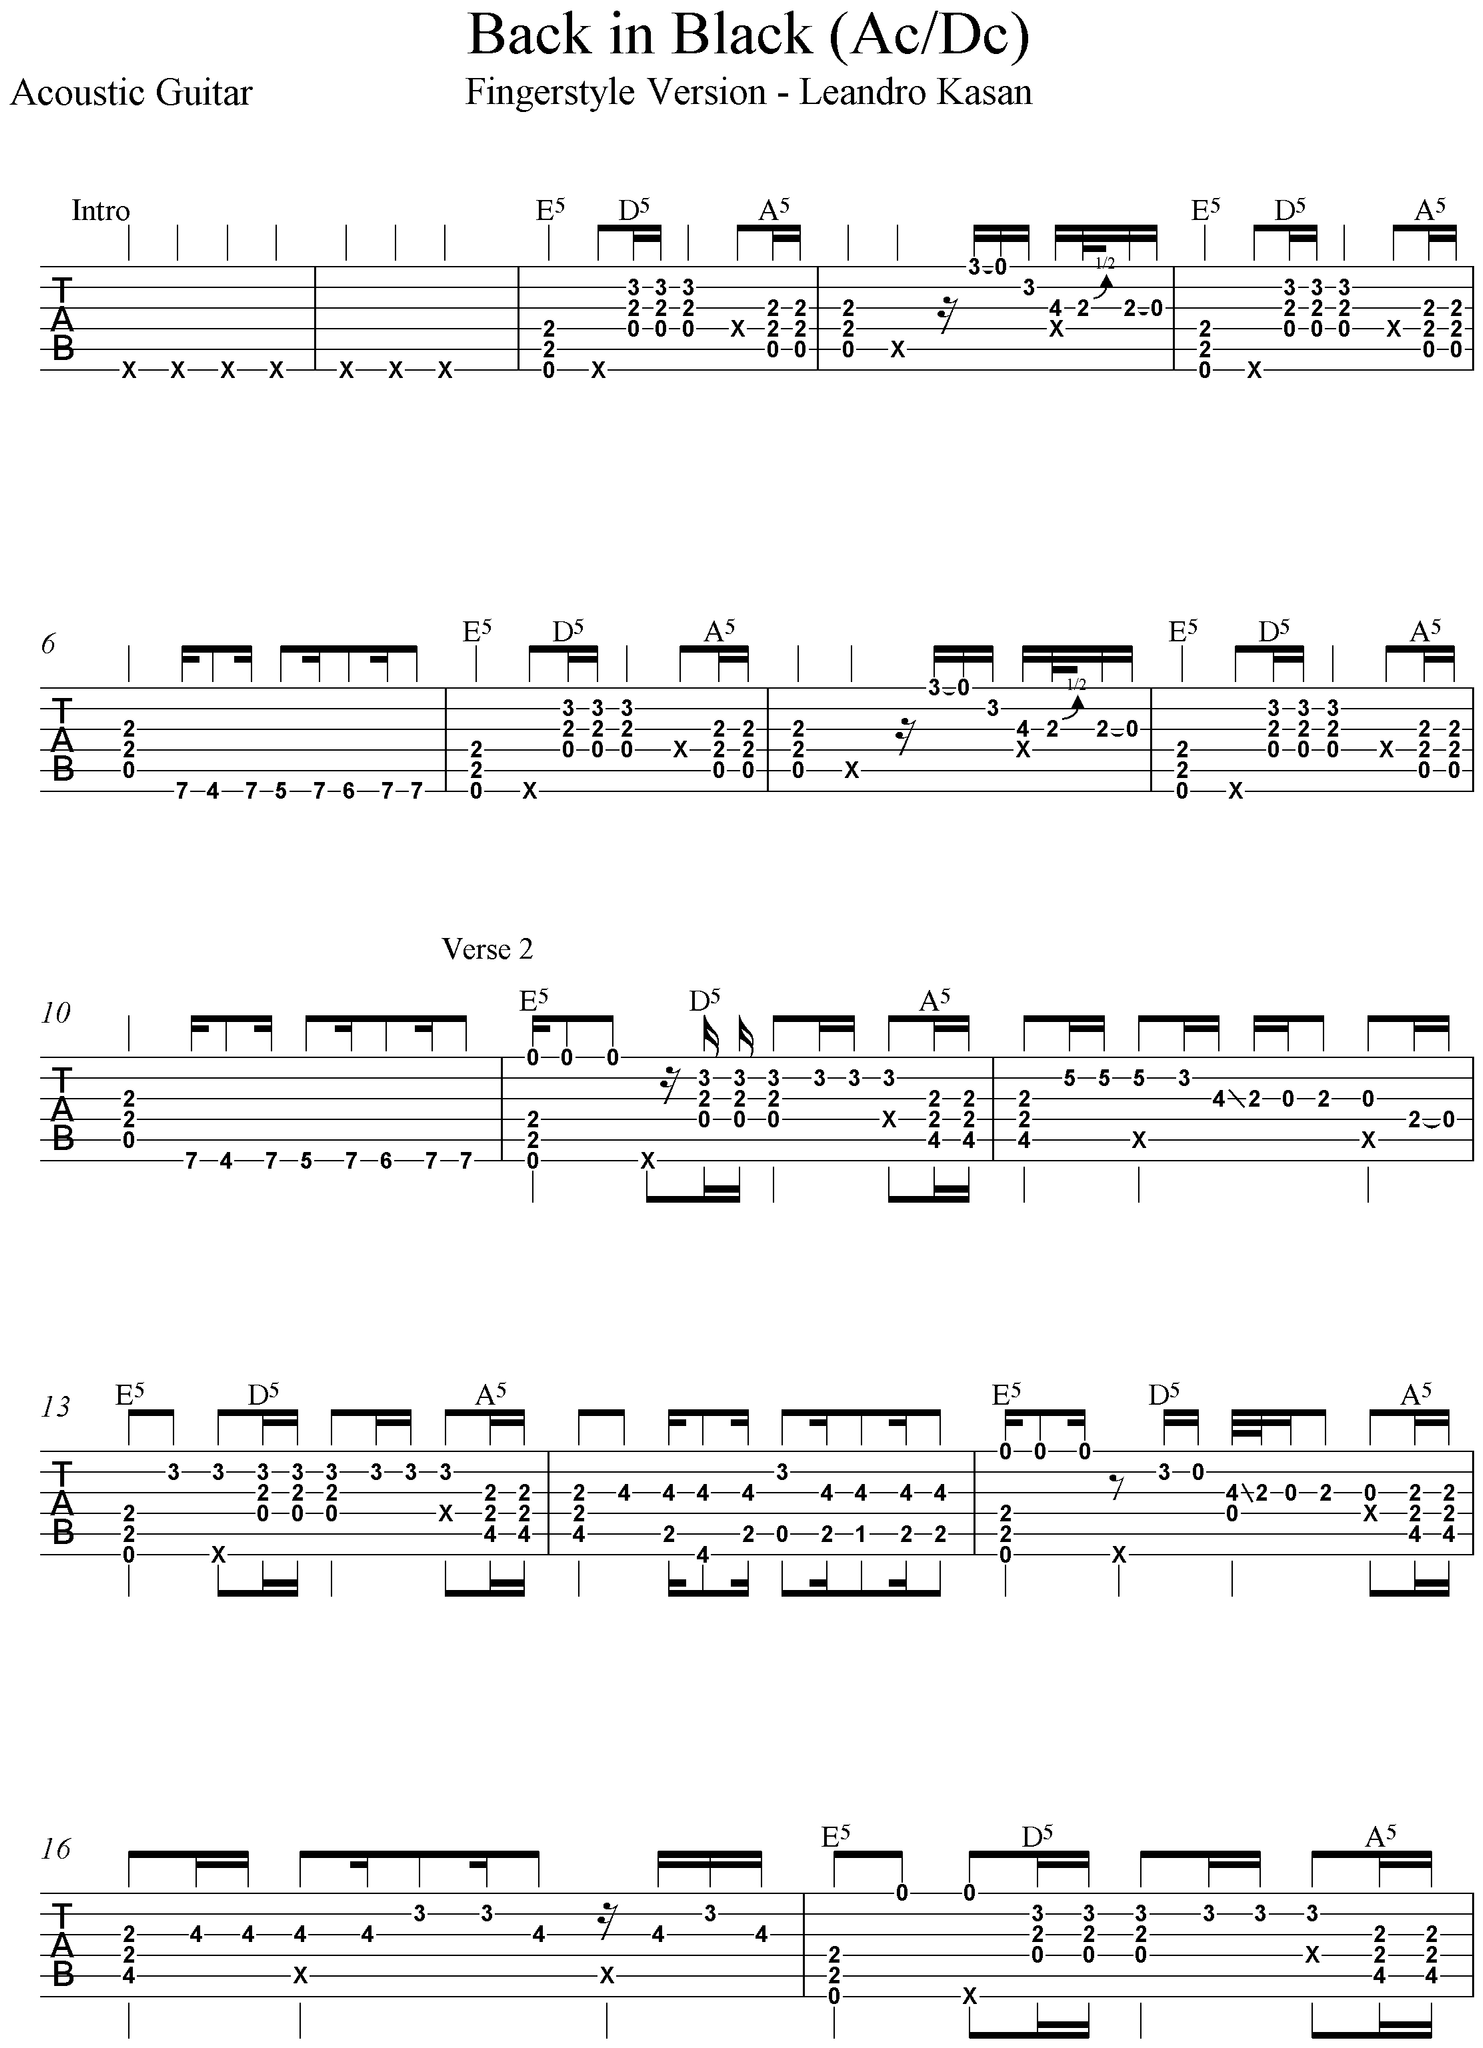 Back In Black by AC/DC - Easy Guitar Tab - Guitar Instructor